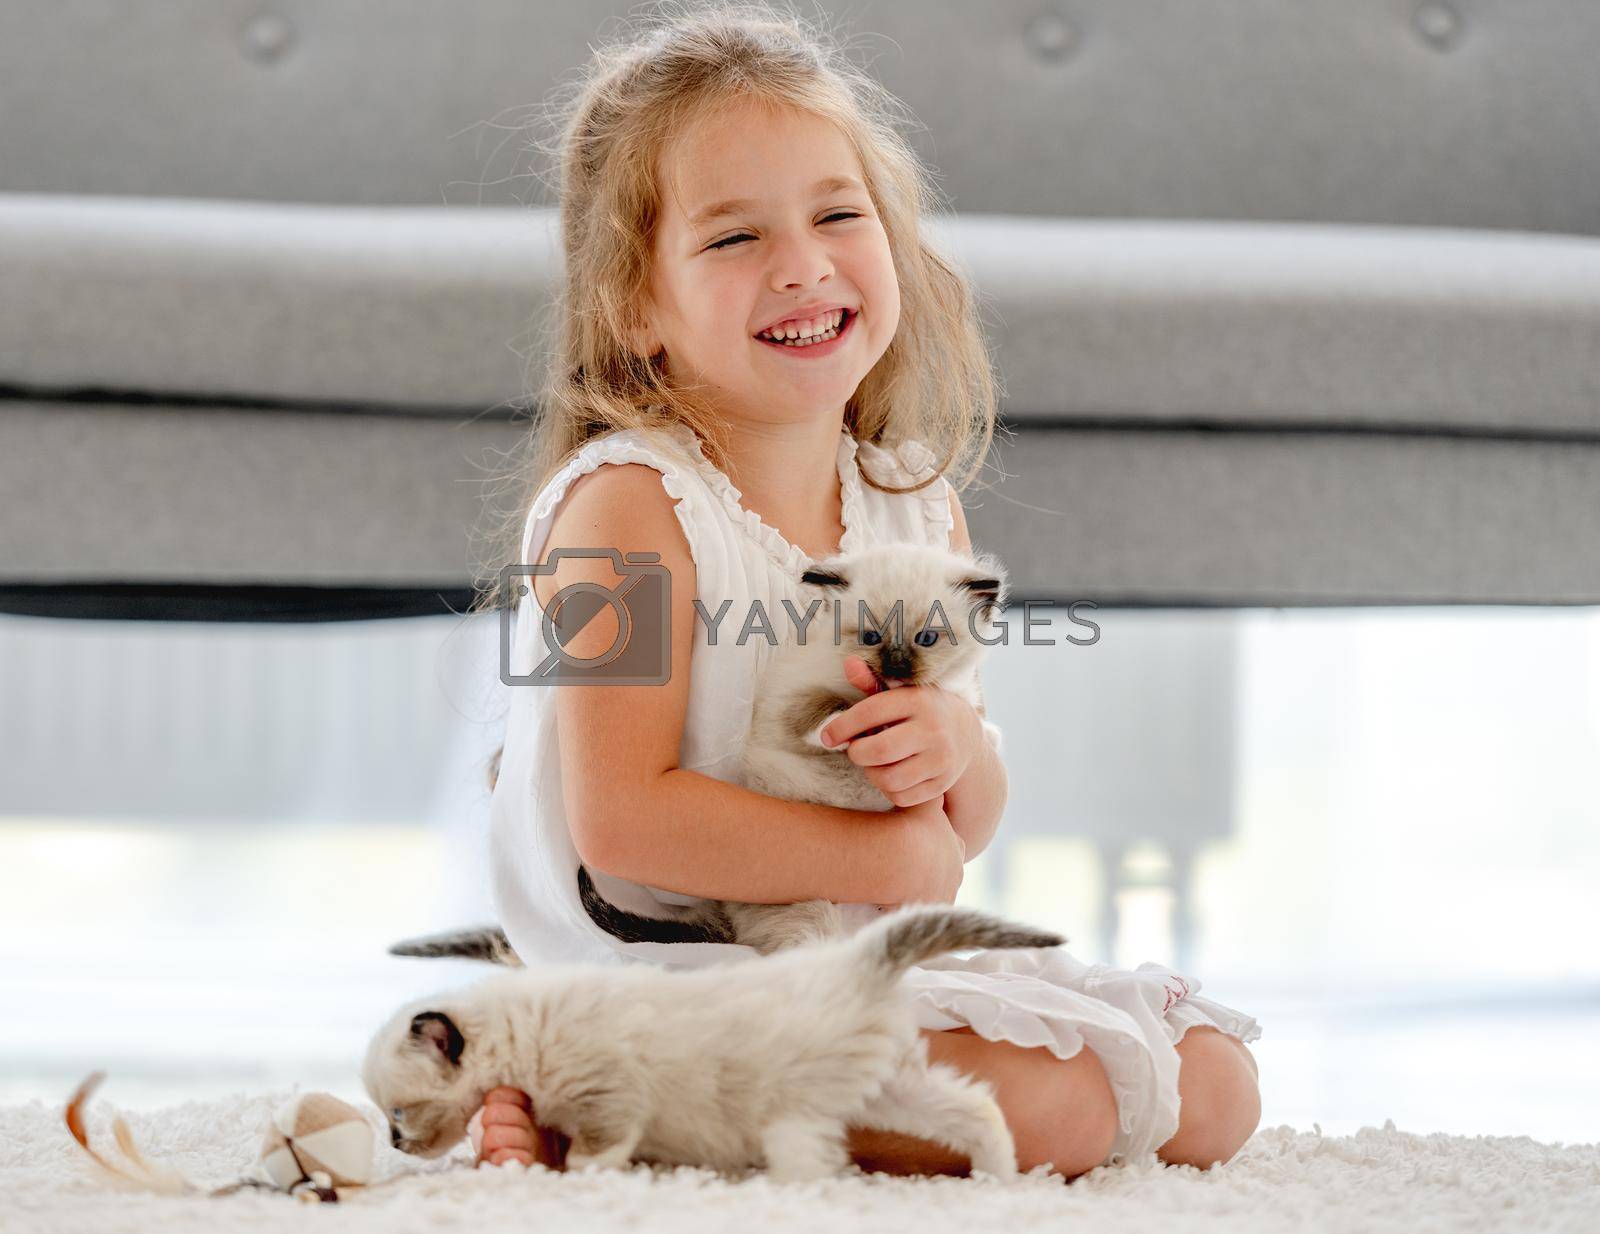 Child girl painting with ragdoll kittens on the floor and smiling. Little female person drawing with colorful pencils and kitty pets close to her at home